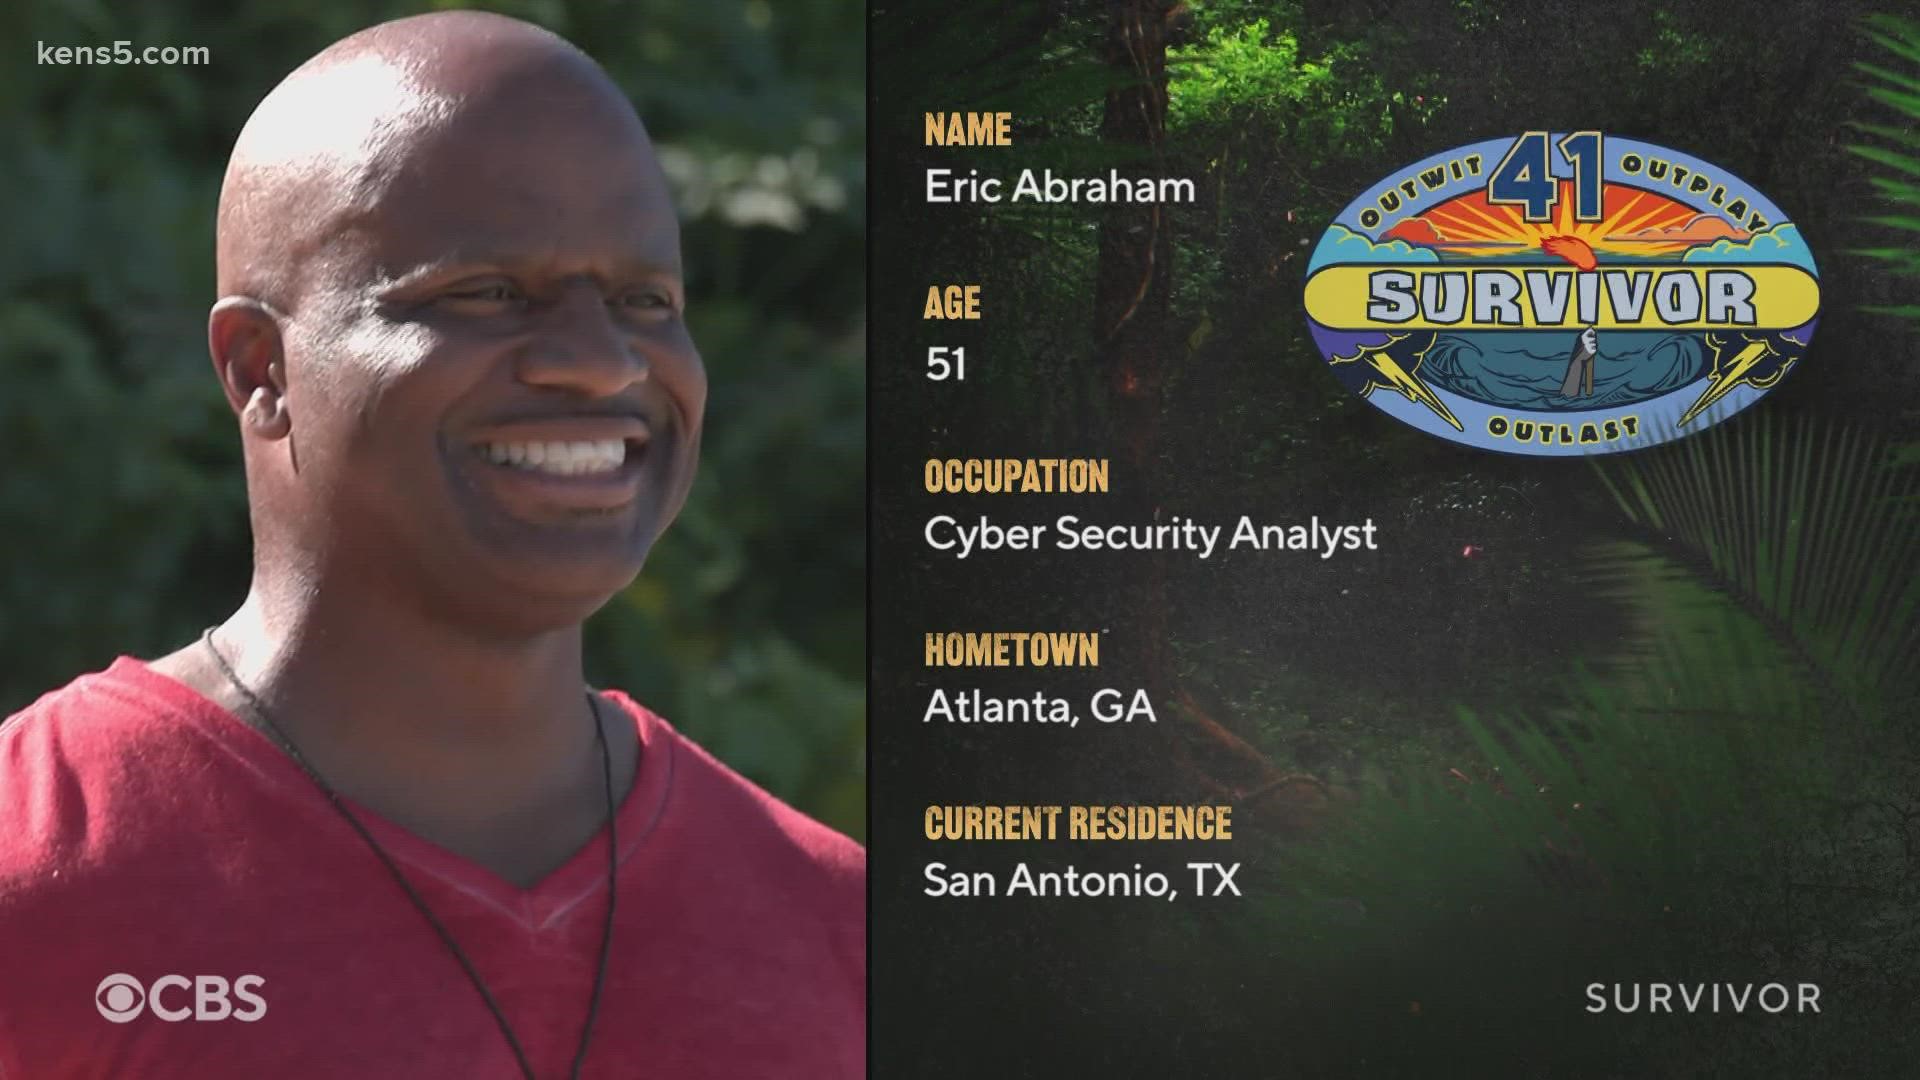 Eric Abraham is a cyber security analyst who said his military experience sets him apart: "I think I could be 'Sole SURVIVOR' because I'm the ultimate package."